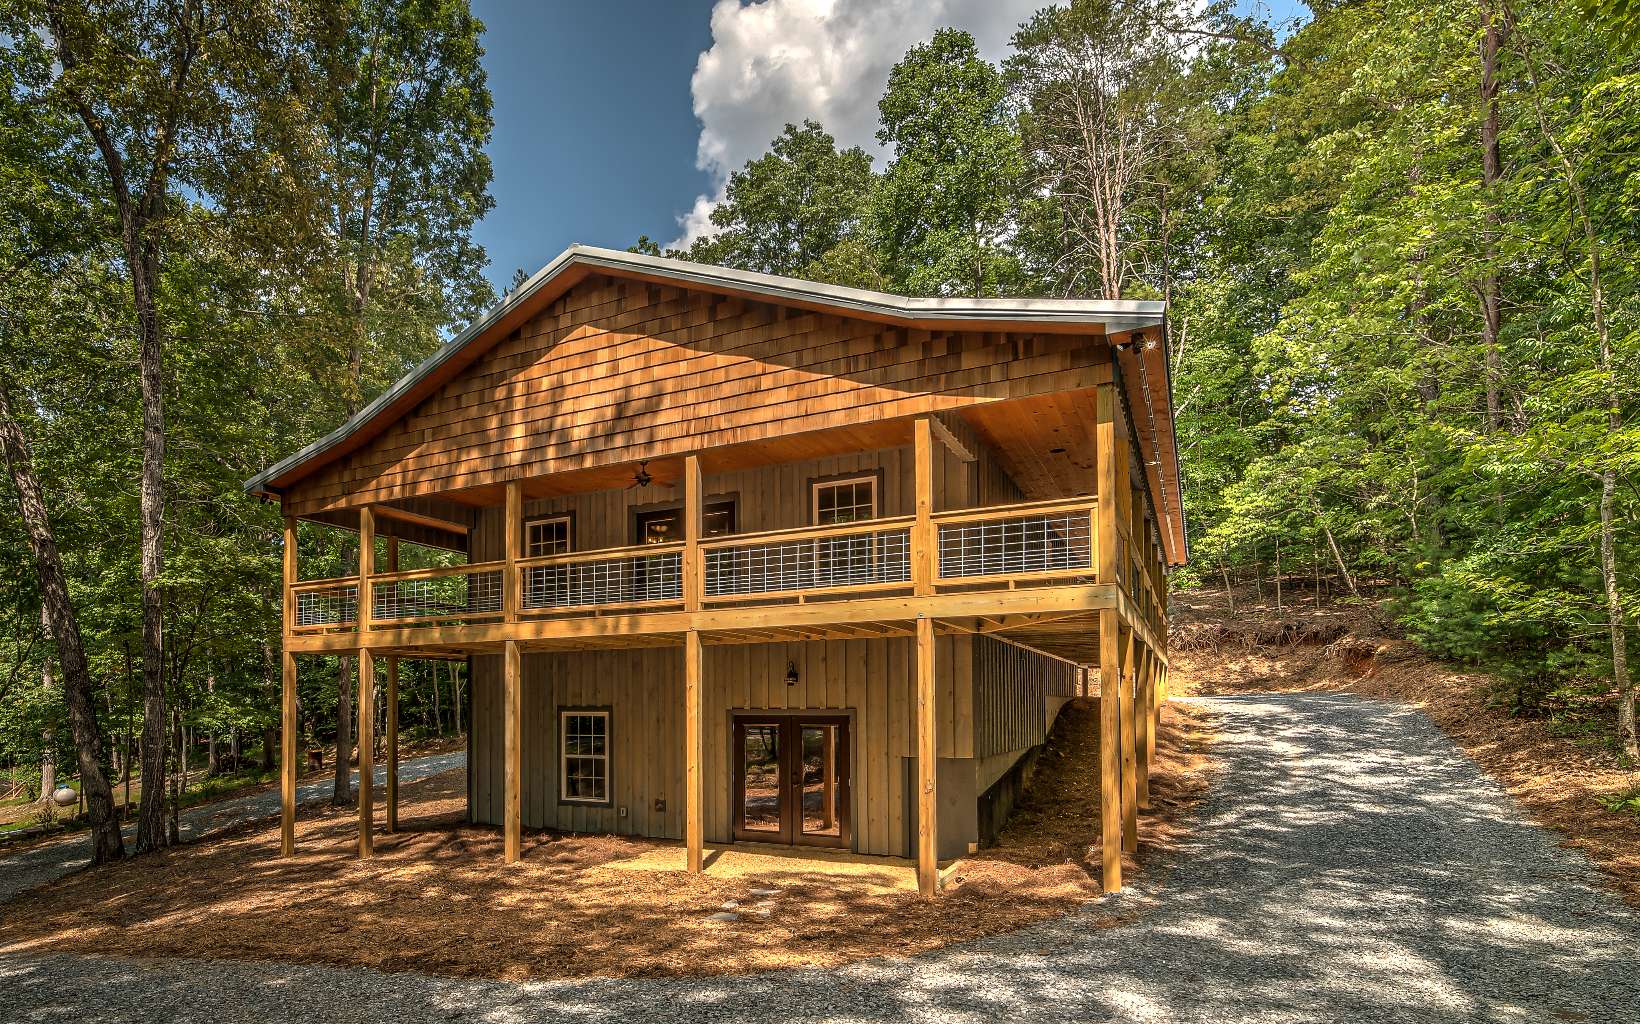 Check out this SUPER CUTE 3BR/2.5BA mountain cabin with numerous upgrades. This is not your cookie-cutter cabin. Perfect for full time, second home, or vacation rental. You'll love the wrap around porches & easy access to both levels of living via the circle driveway. Open concept, beautiful LVP flooring, tongue and groove ceilings, barn doors, and a whiskey barrel half bath. WOW kitchen has a huge butcher block island, leathered granite countertops, & stainless appliances. Master suite complete with walk-in closet, upscale tile shower w/2 shower heads. Finished terrace level features 2 BR, 1BA & large family-recreation room. New firepit is ready to go for chilly evenings, enjoy smores galore. 3 zoned HVAC (wifi). Move In Ready! Located in popular river resort, easy access & no steep roads; high speed internet; river park, 3 pools, tennis, recreation/fitness center & more!